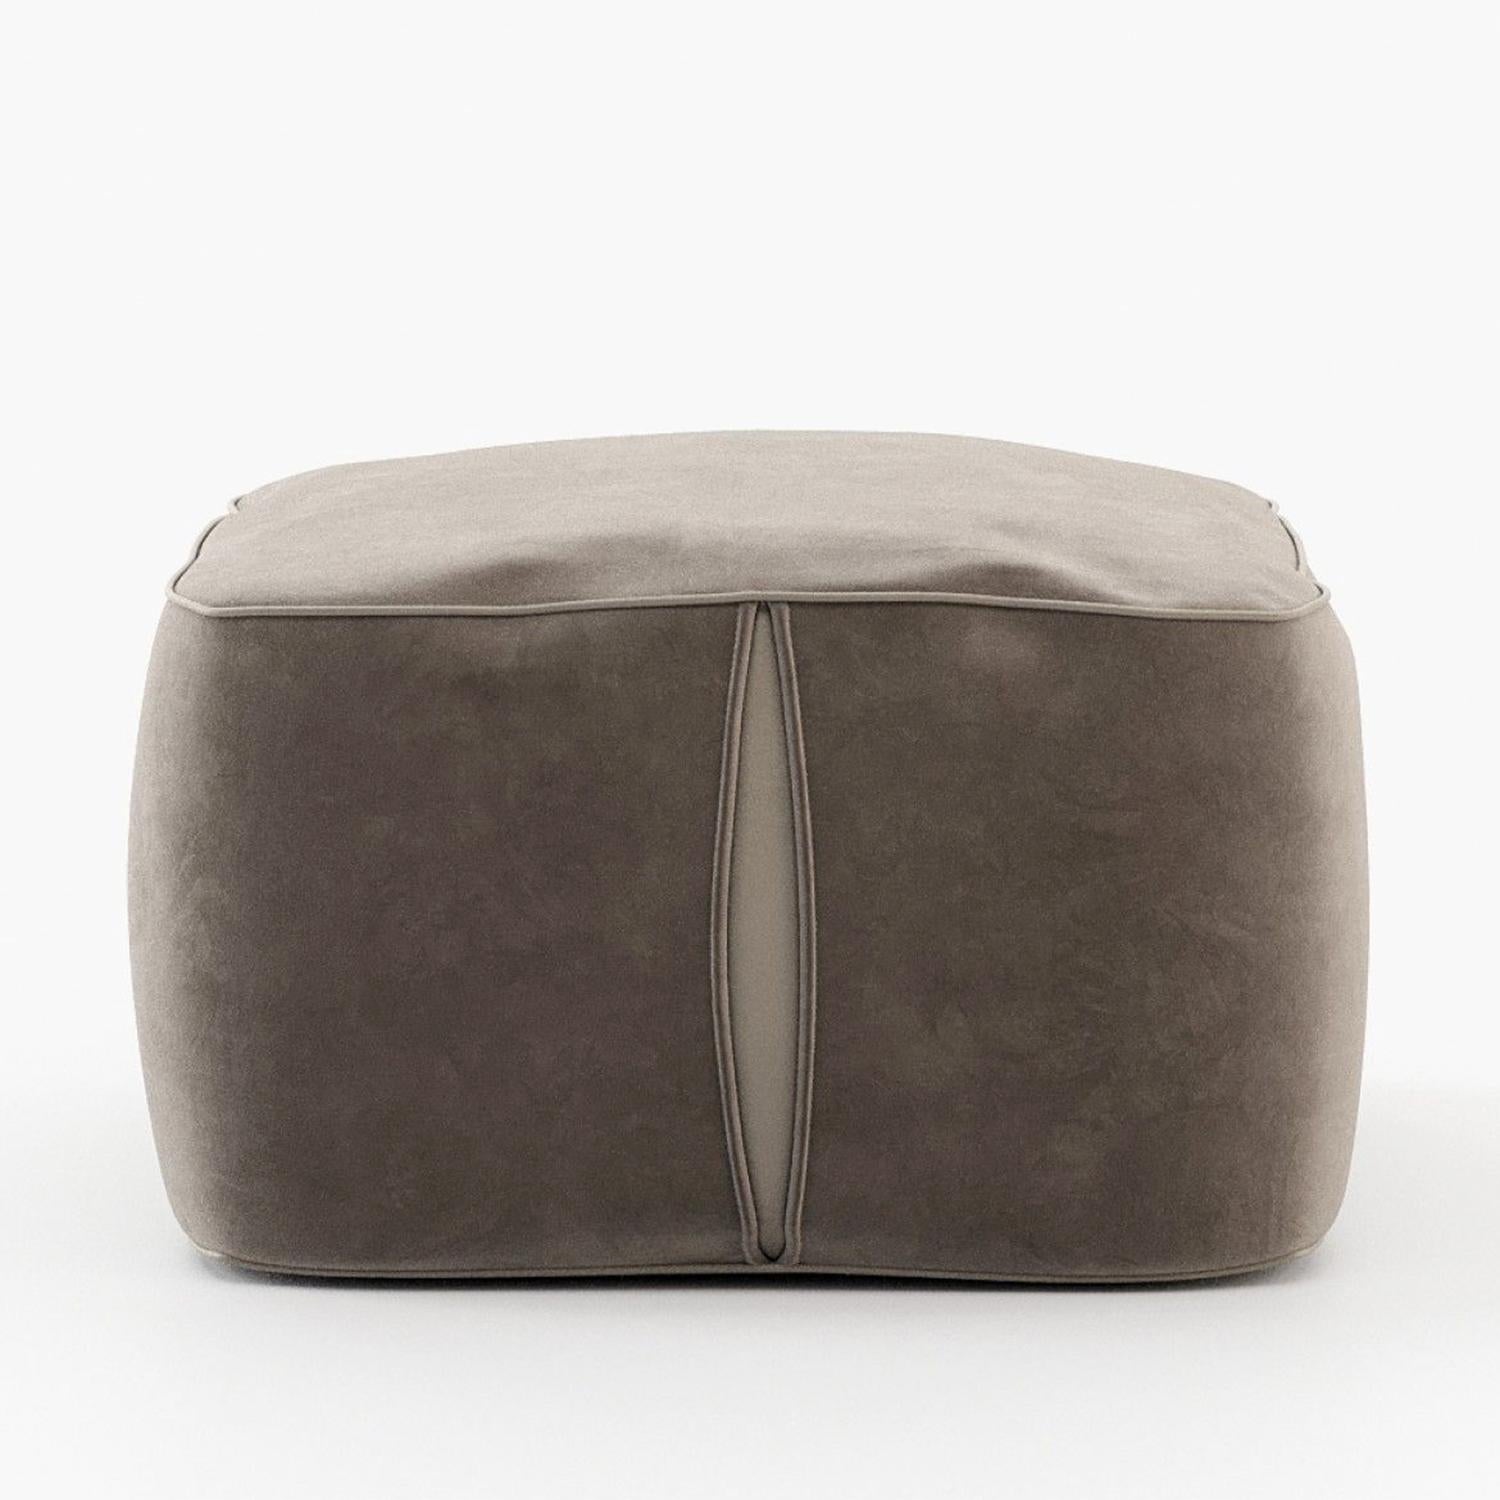 Pouf Sheffield Grey upholstered and covered with
grey fabric (CAT A.).
Also available on request with other fabrics.